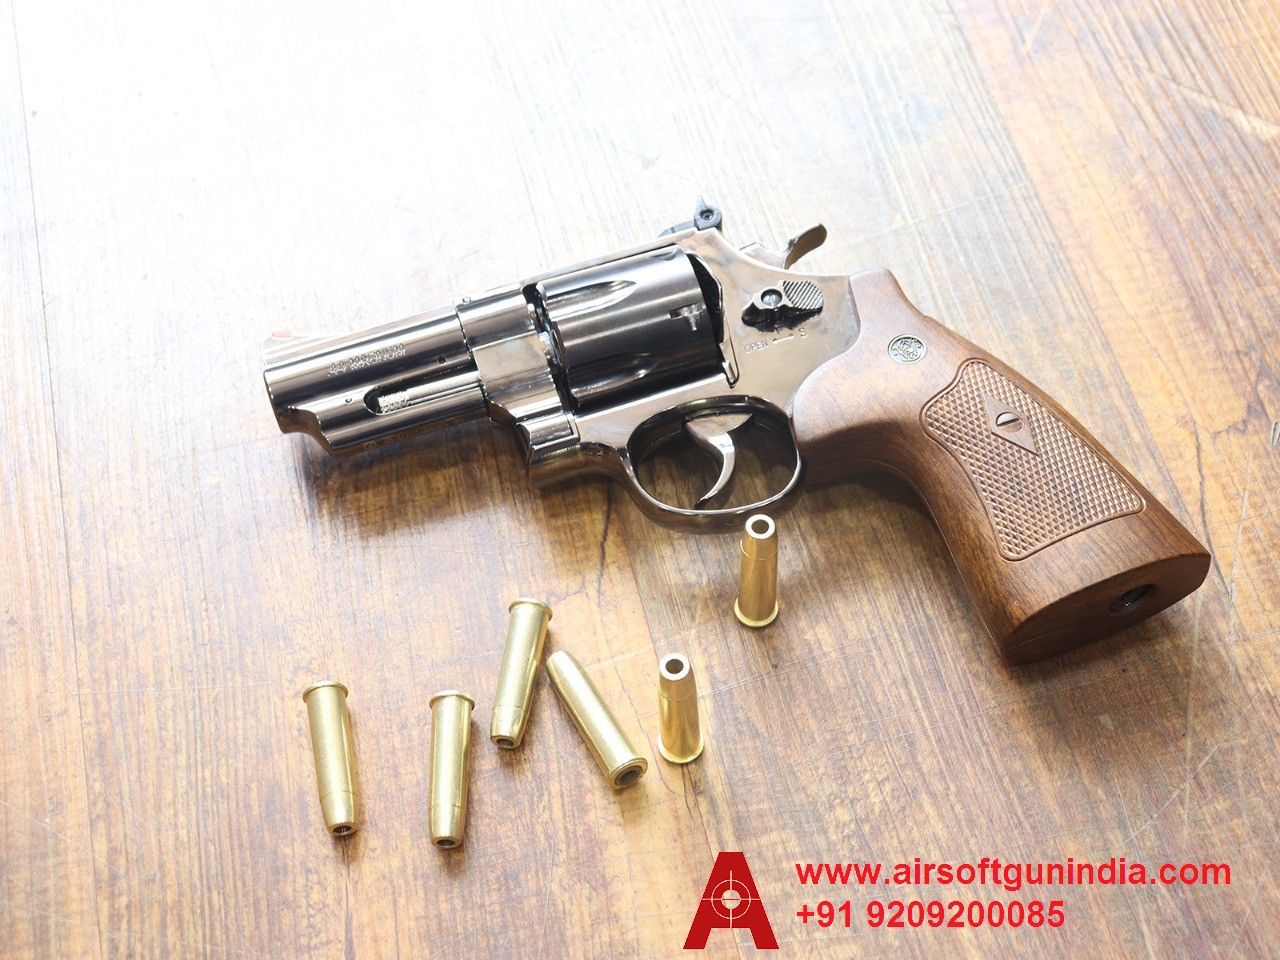 Smith & Wesson M29 3 Inch Co2 BB .177Cal, 4.5mm Air Revolver By Airsoft Gun India